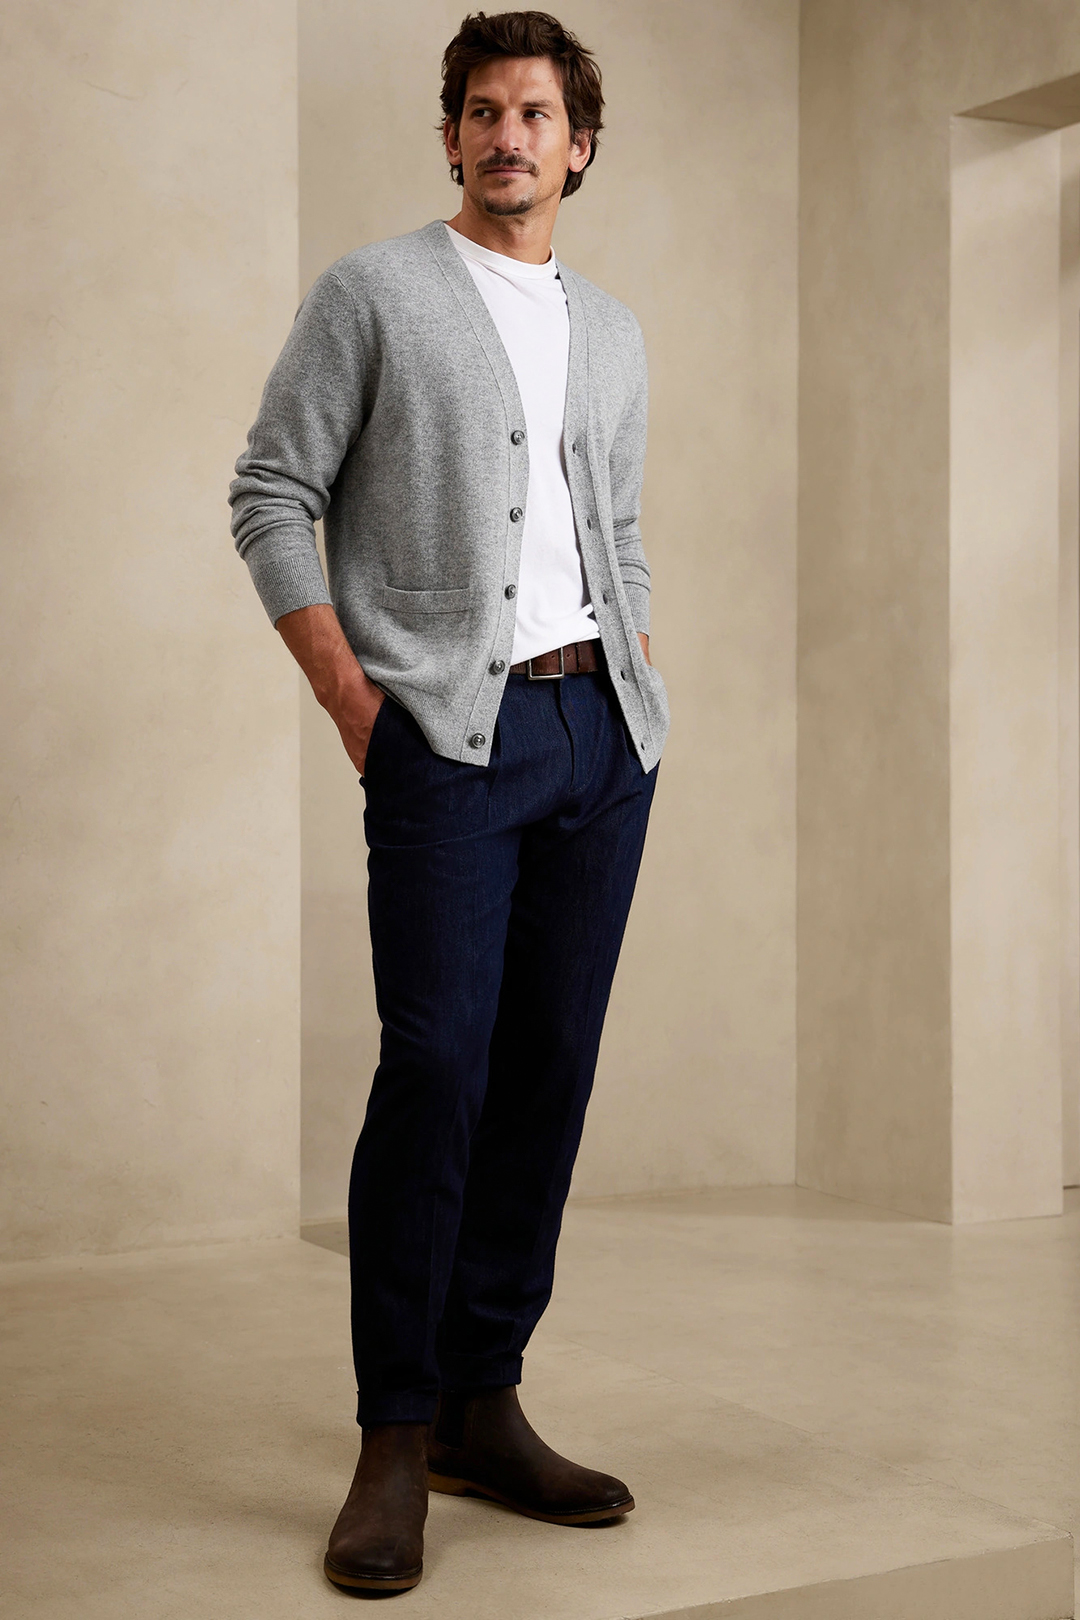 Wear a gray cardigan, white t-shirt, navy denim jeans, and brown Chelsea boots